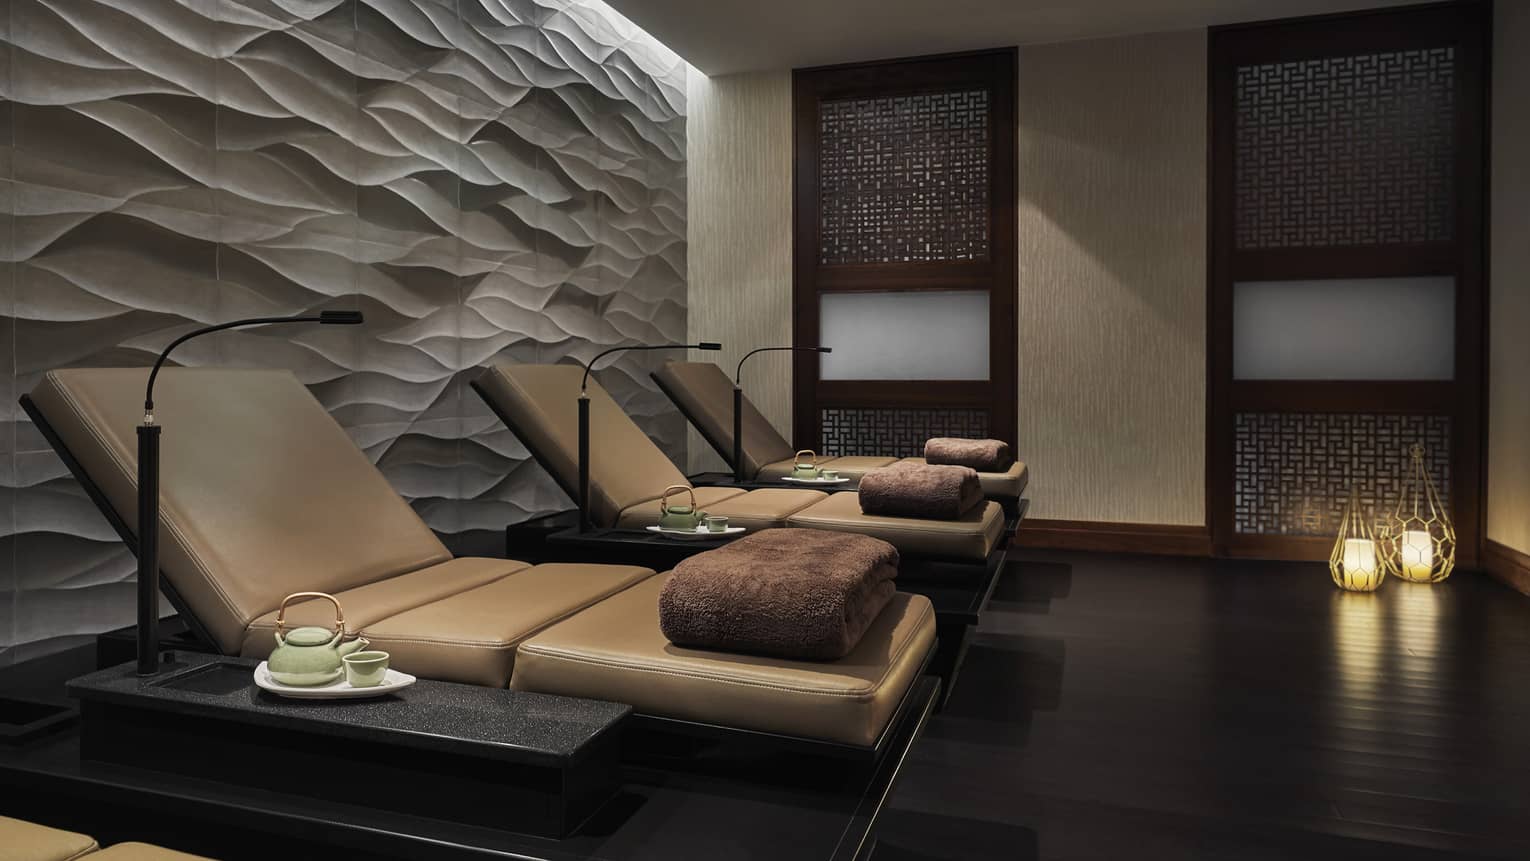 Several lounge chairs with large brown towels placed atop them in a stone room.